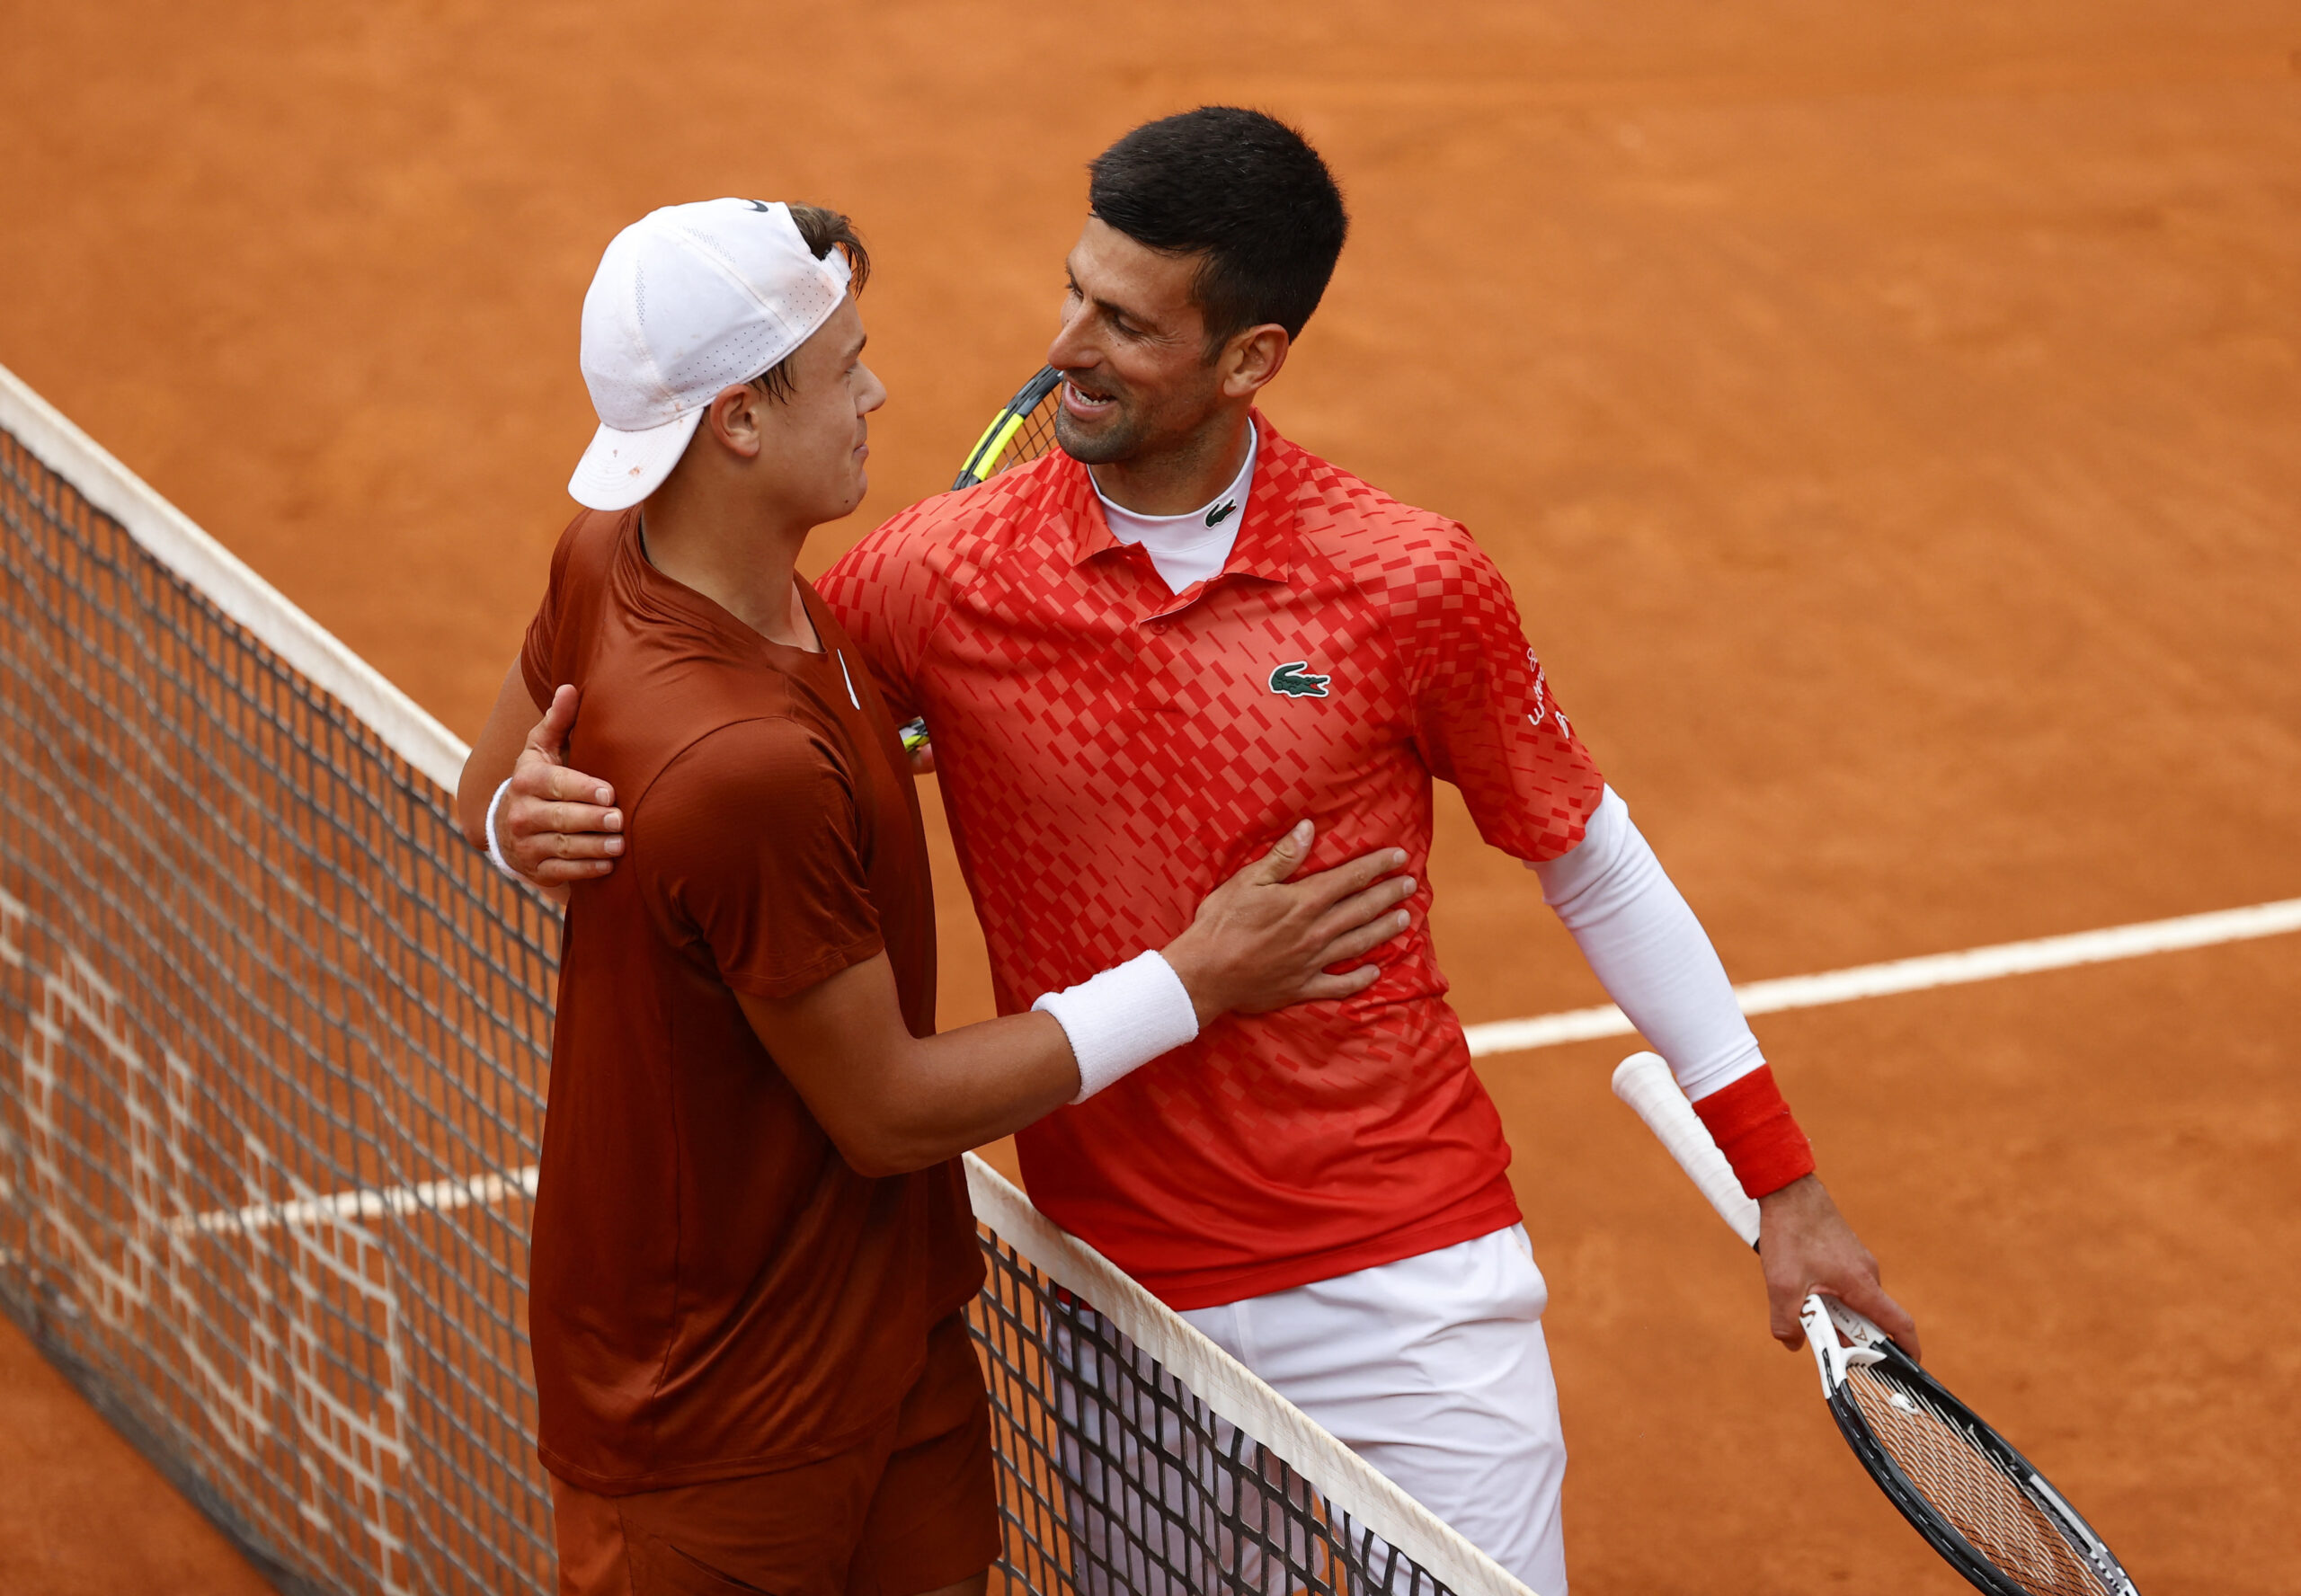 Novak Djokovic knocked out of Italian Open by 20-year-old Holger Rune Inquirer Sports